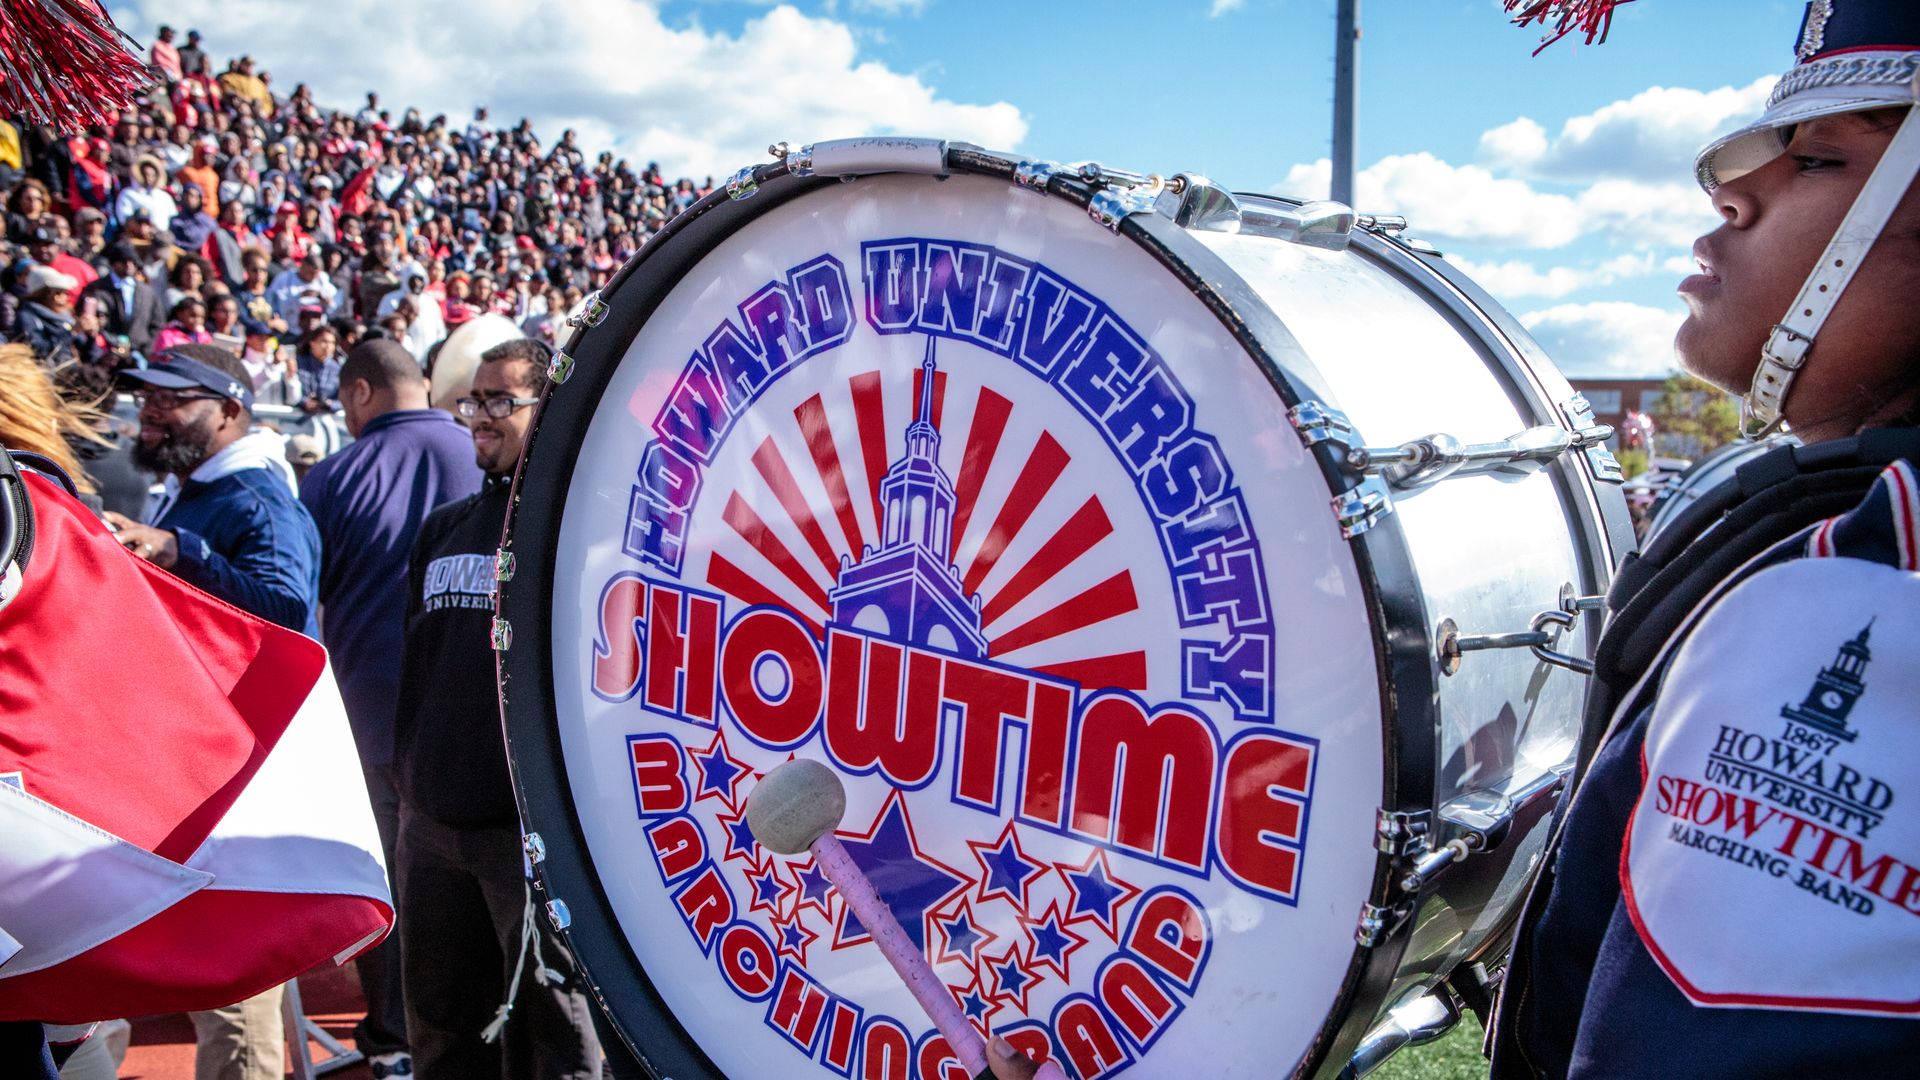 A closeup of a member of Howard University's marching band who's holding a drum that says "showtime" in red and blue letters.